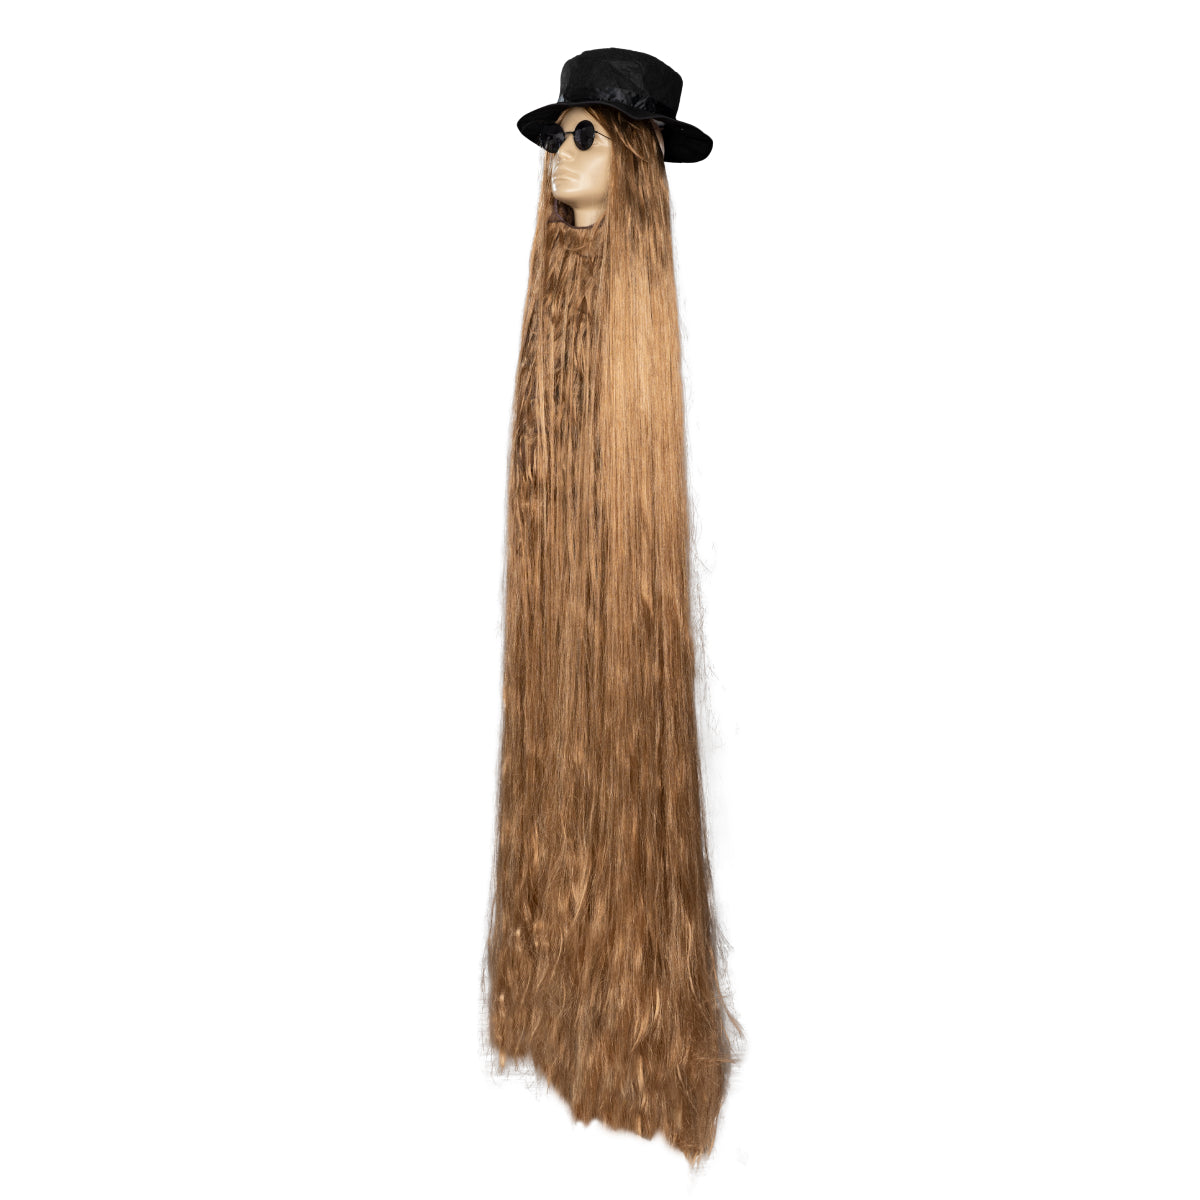 Get Hairy with Cousin ITT Adams Family Long Hair Cousin Wig for Halloween Costume Cosplay